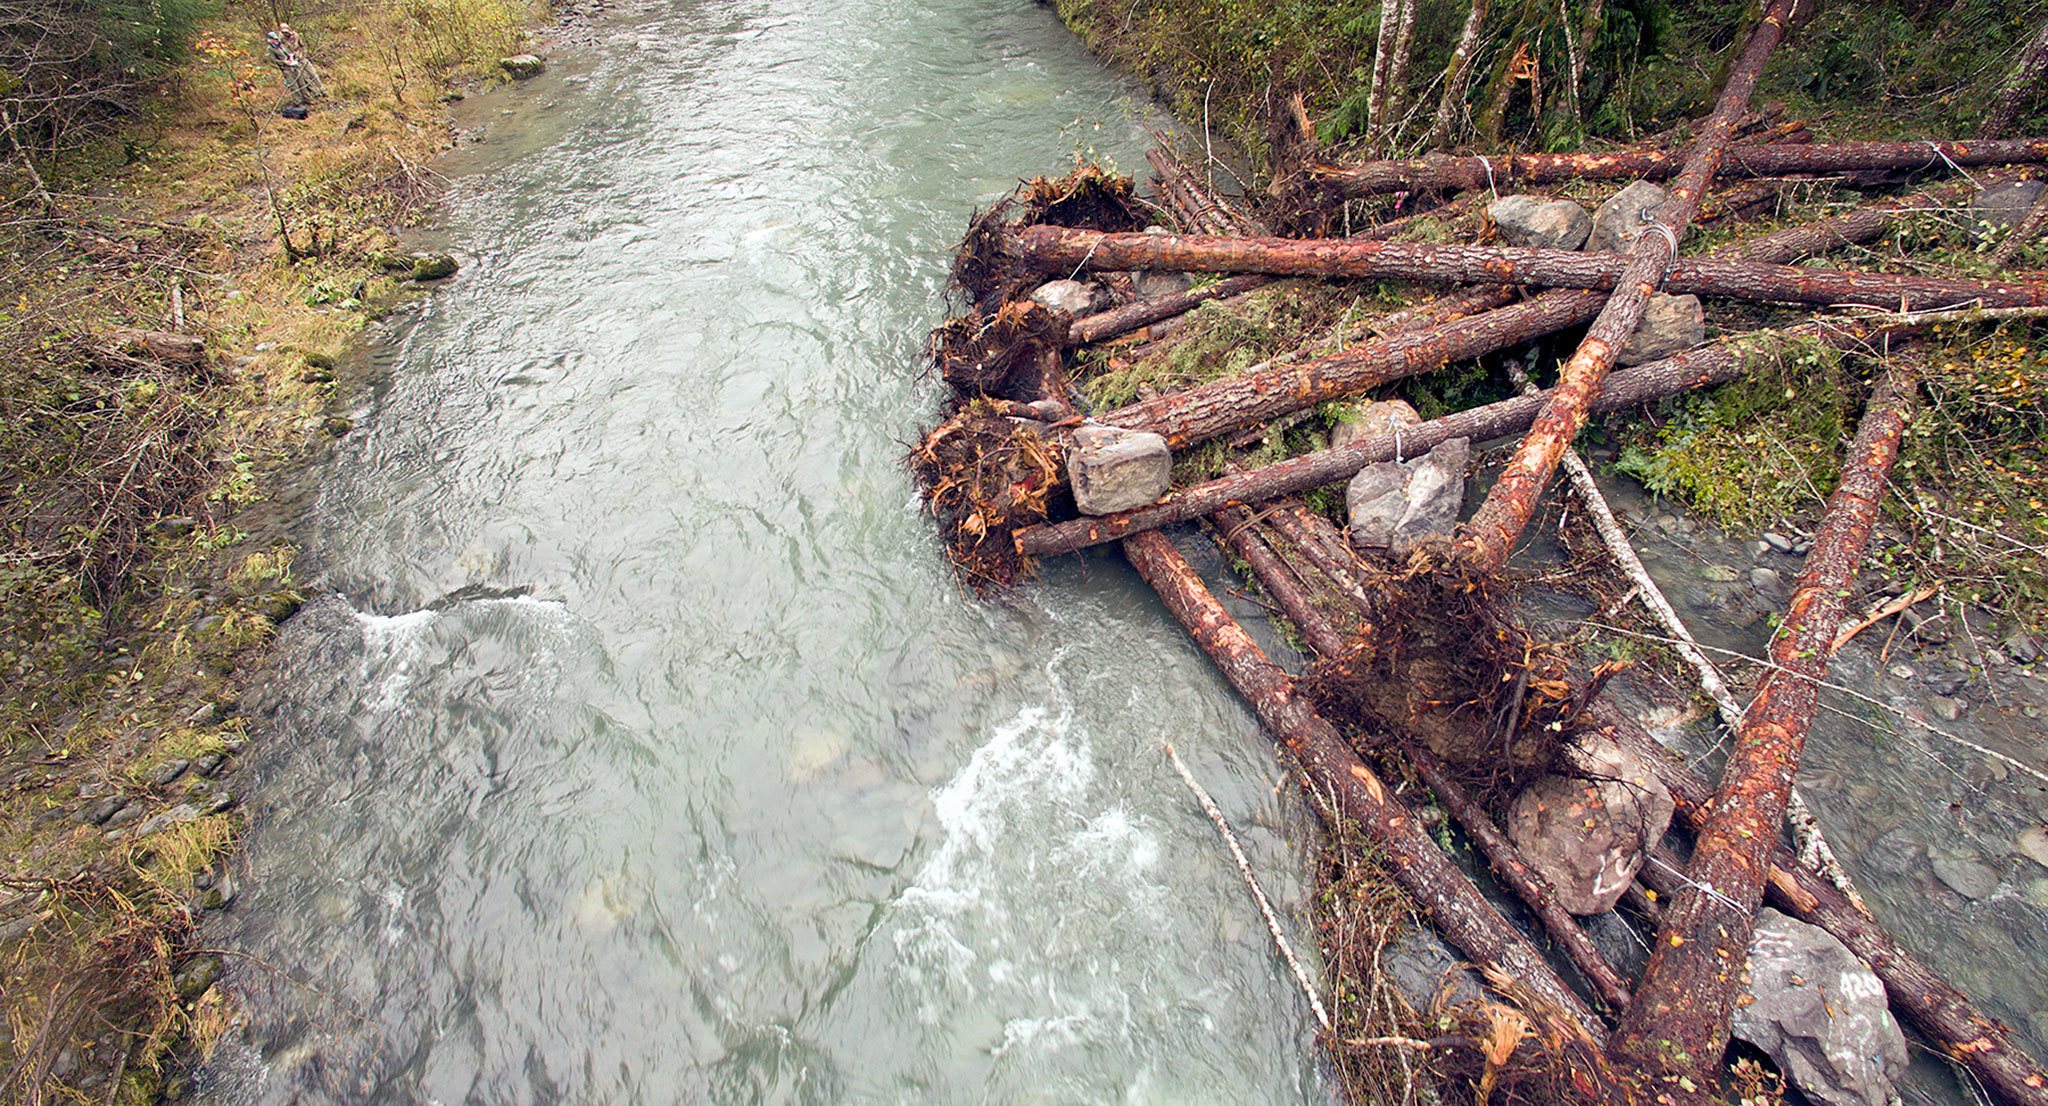 An aerial view of one of the logjams. (Hilton Turnbull)